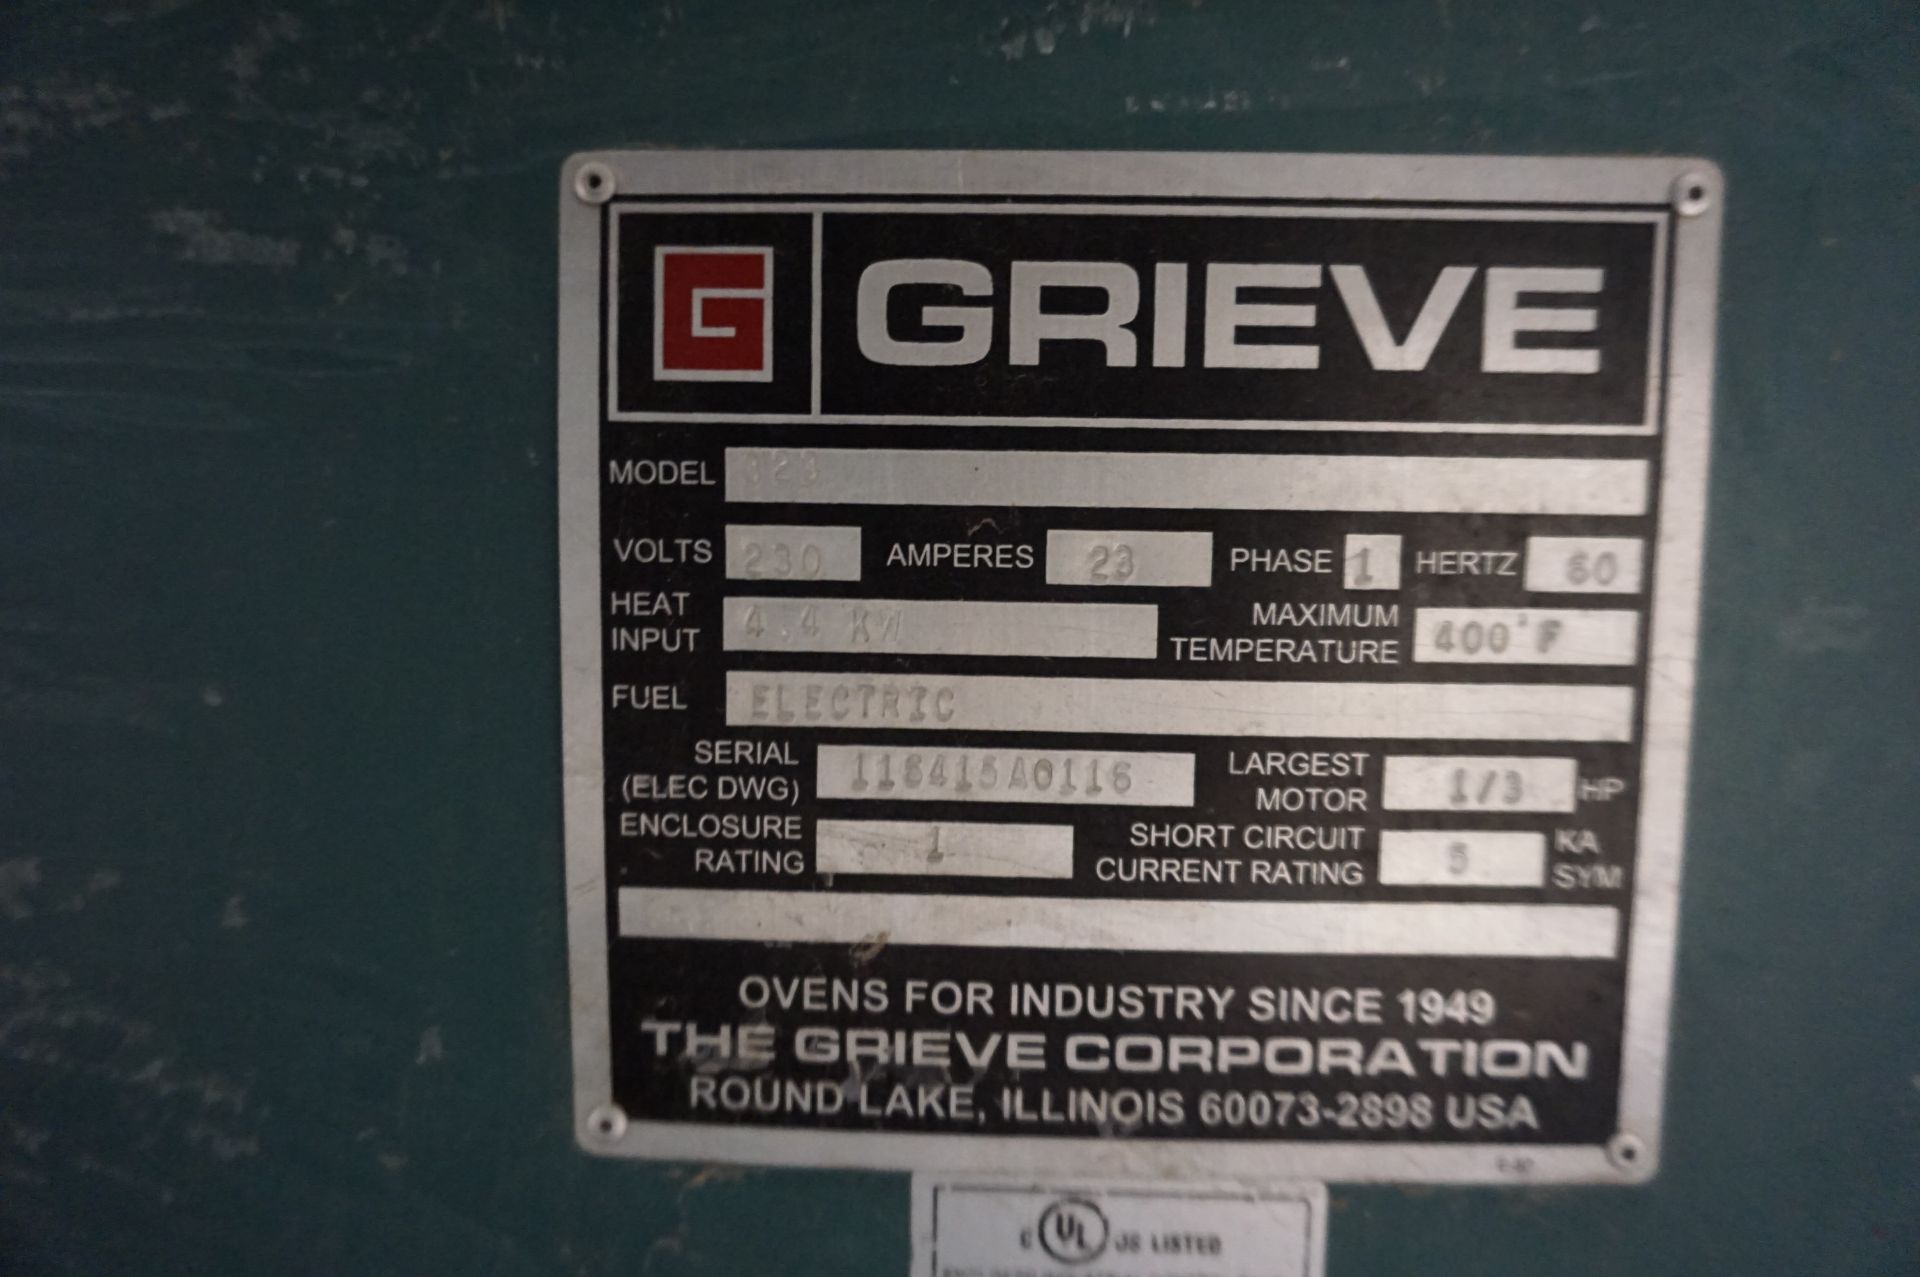 GRIEVE HEAT TREAT BENCH OVEN, MODEL 323, ELECTRIC, MAX TEMP 400 DEGREE, S/N 116415A0116 * - Image 4 of 4